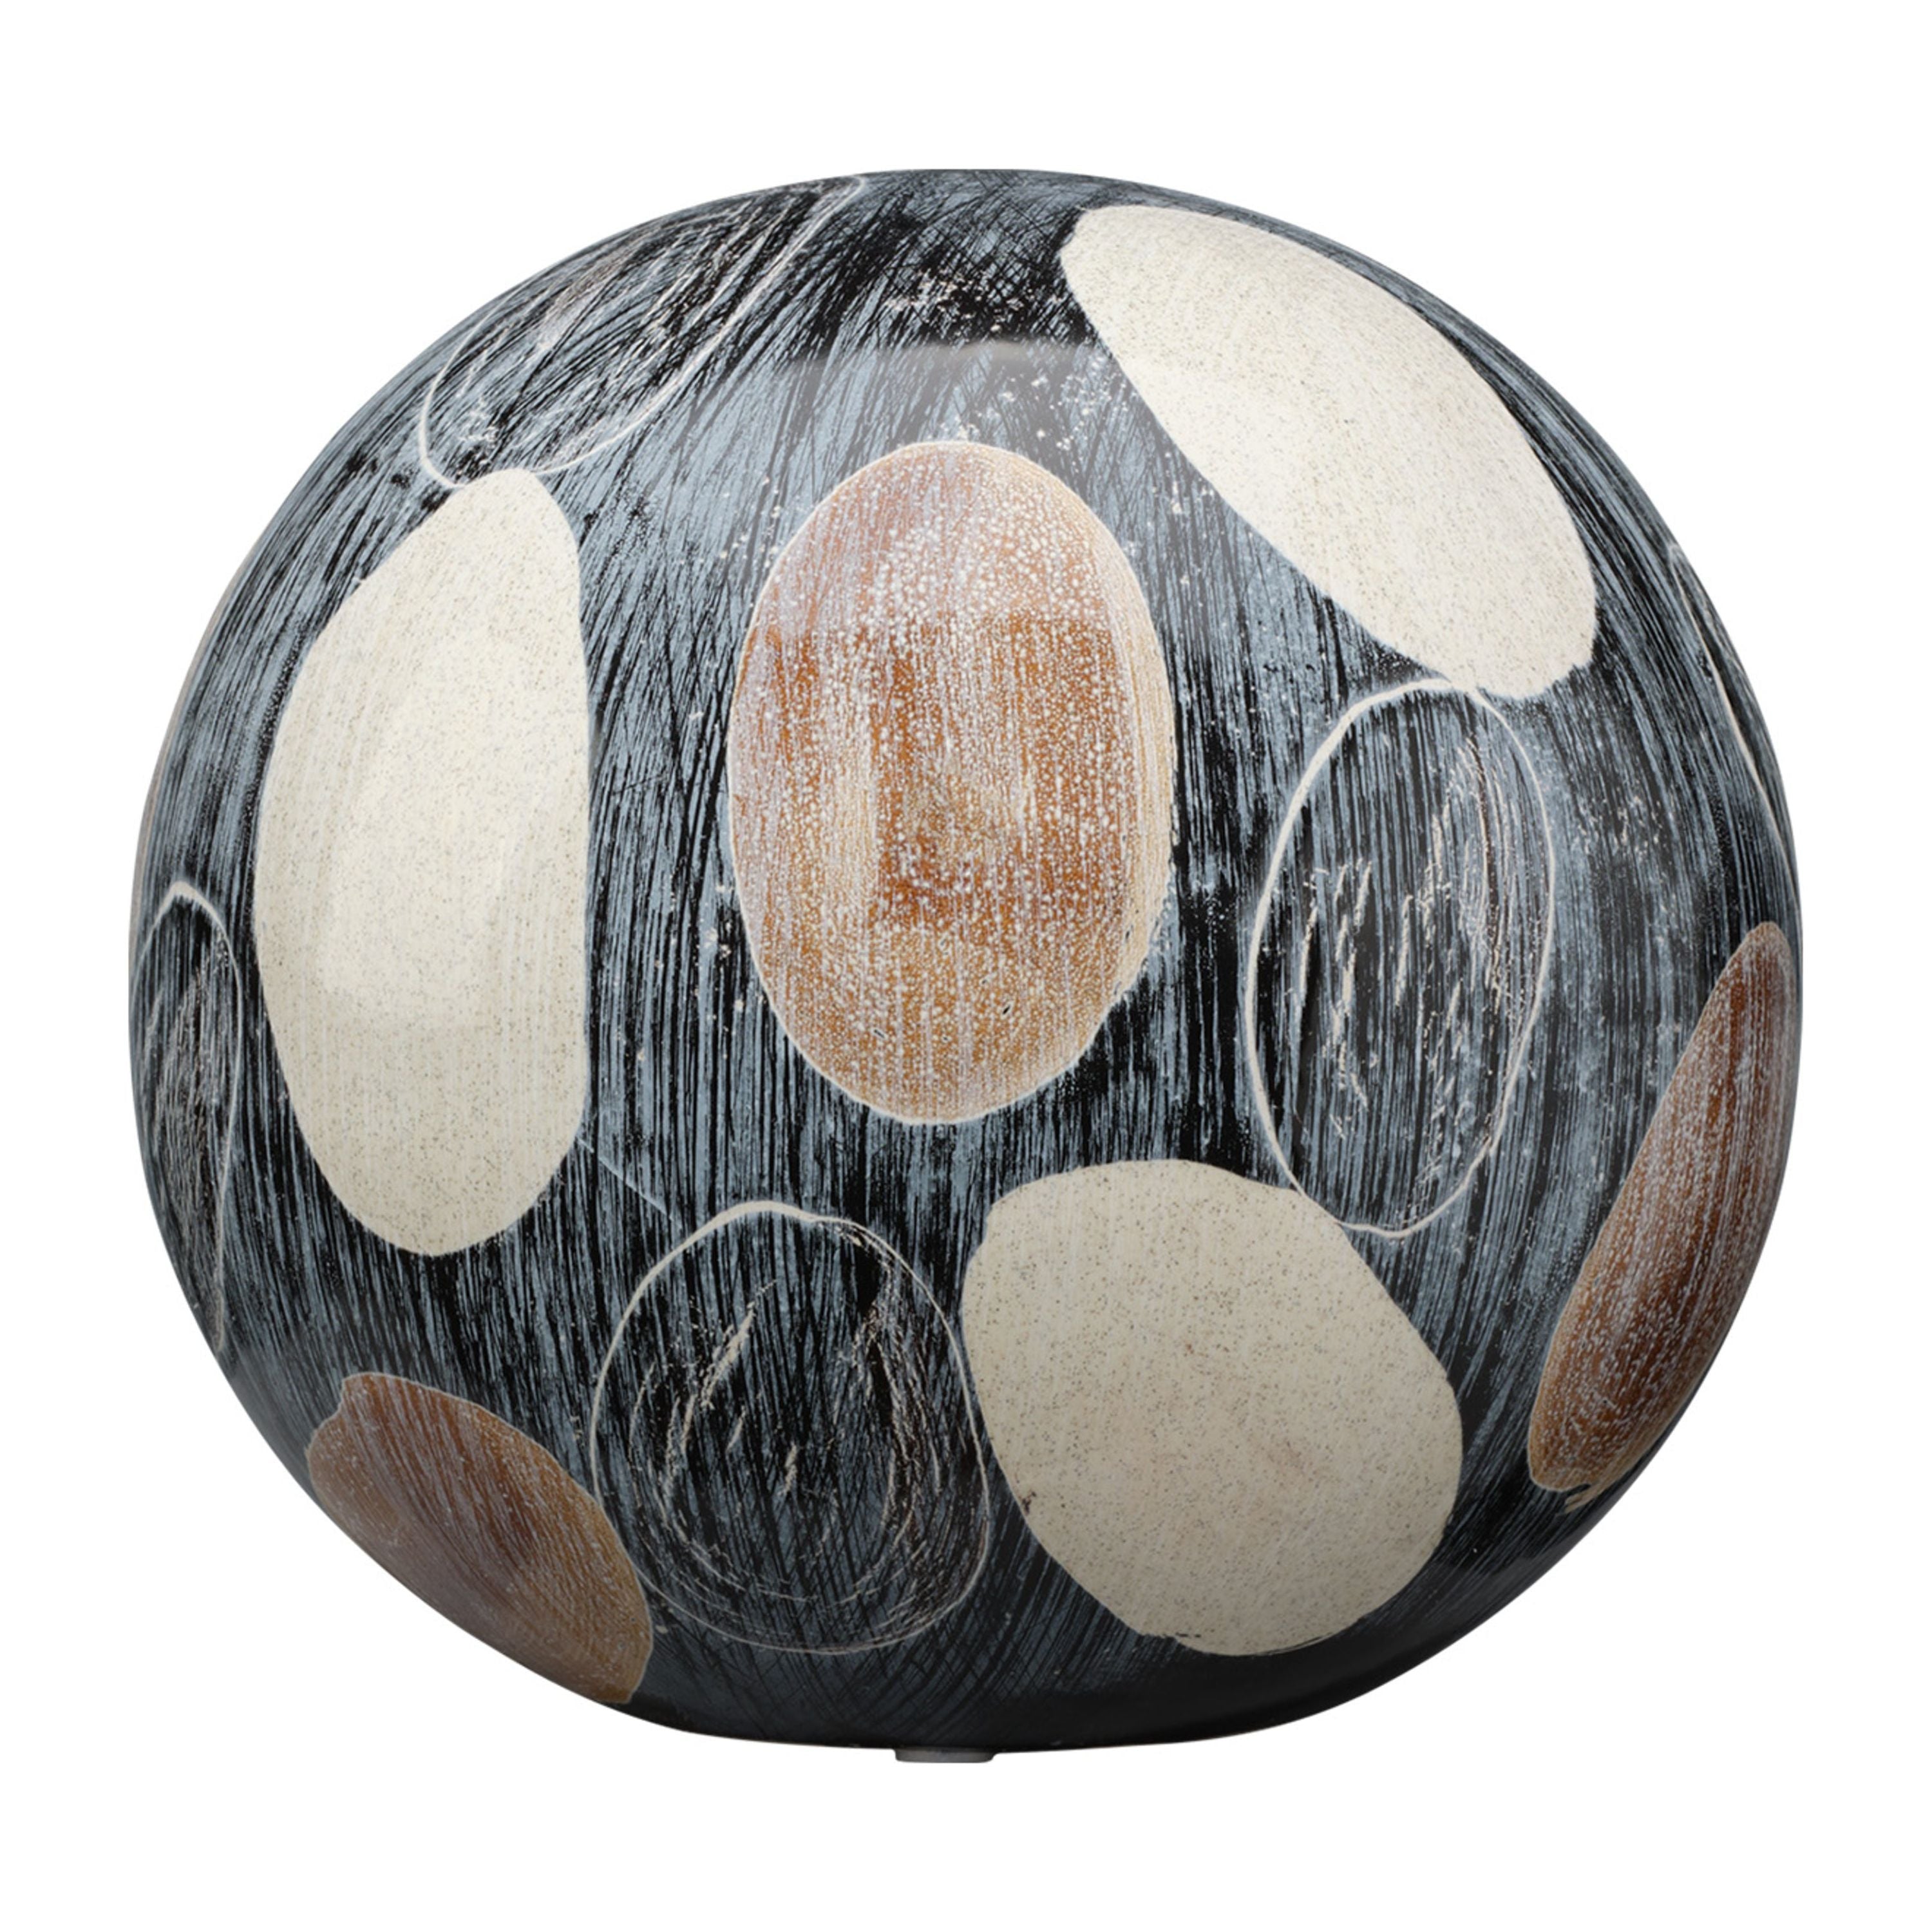 Jamie Young Company - 7PAIN-LGCR - Painted Sphere - Painted - Blue